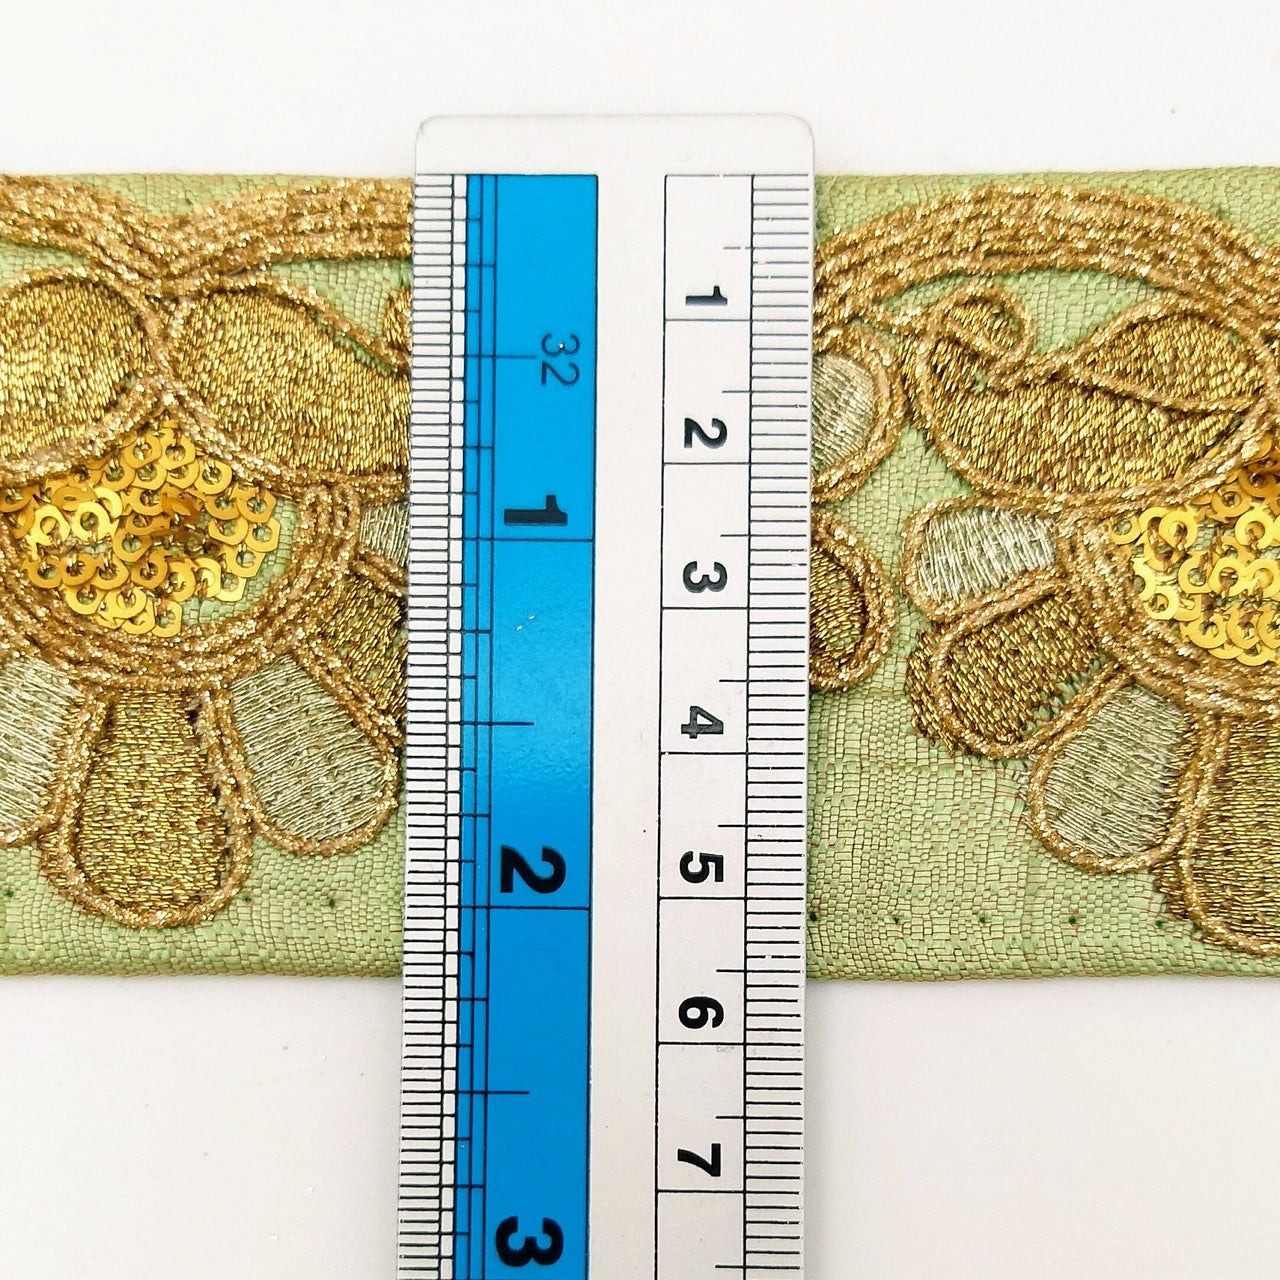 Green Art Silk Trim In Gold Floral Embroidery, Gold Embroidered Flowers Border, Floral Trim